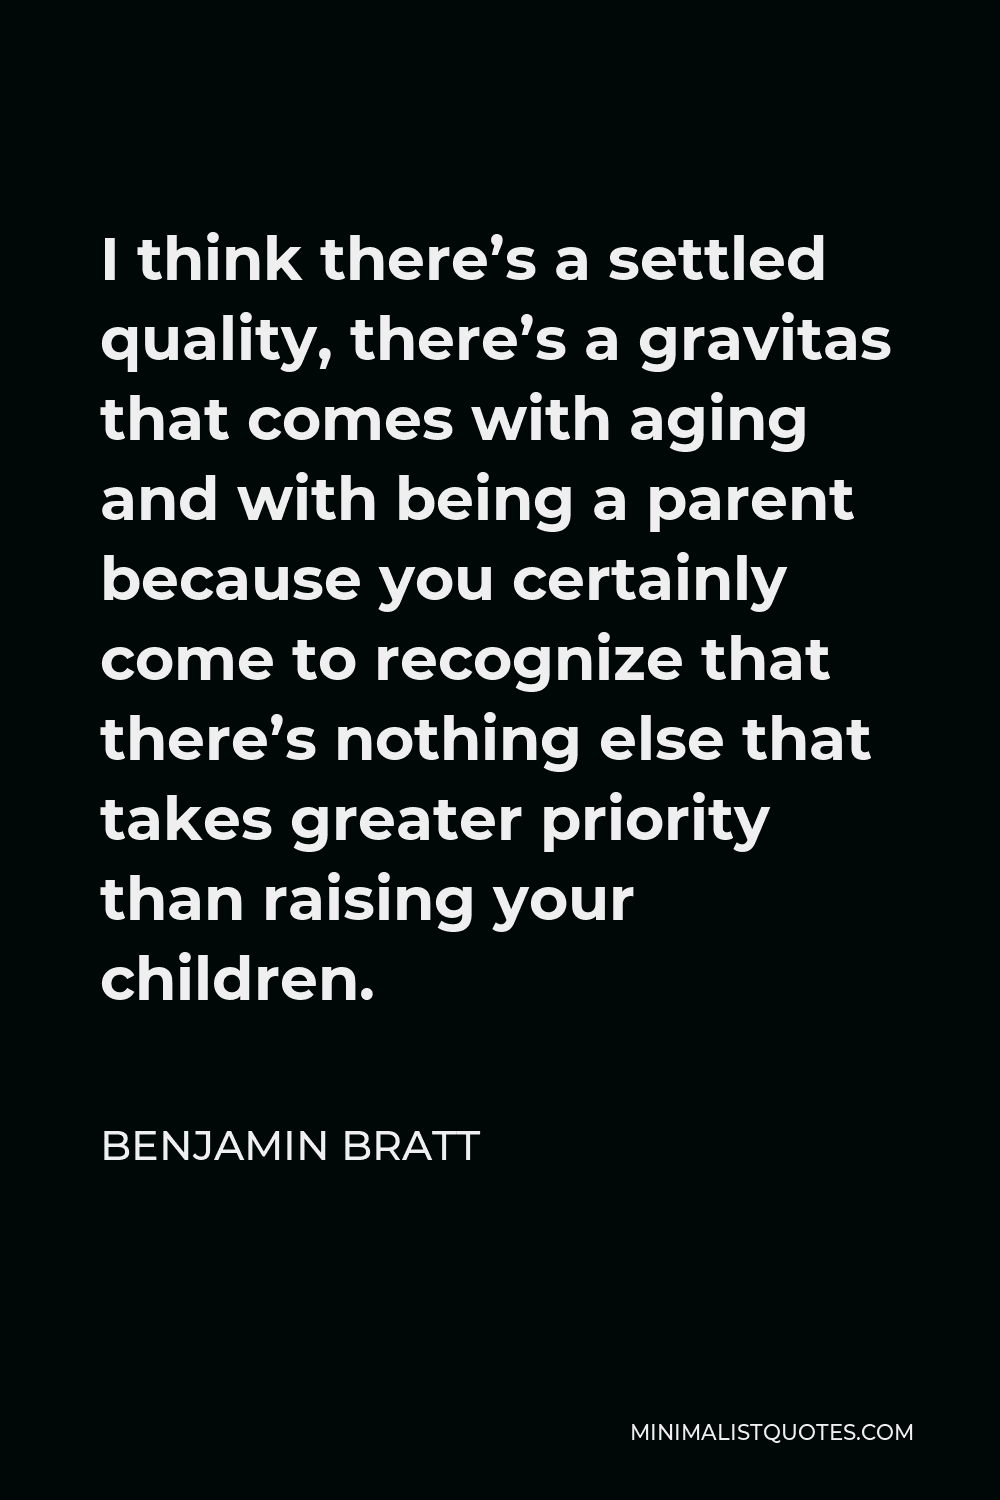 Benjamin Bratt Quote - I think there’s a settled quality, there’s a gravitas that comes with aging and with being a parent because you certainly come to recognize that there’s nothing else that takes greater priority than raising your children.